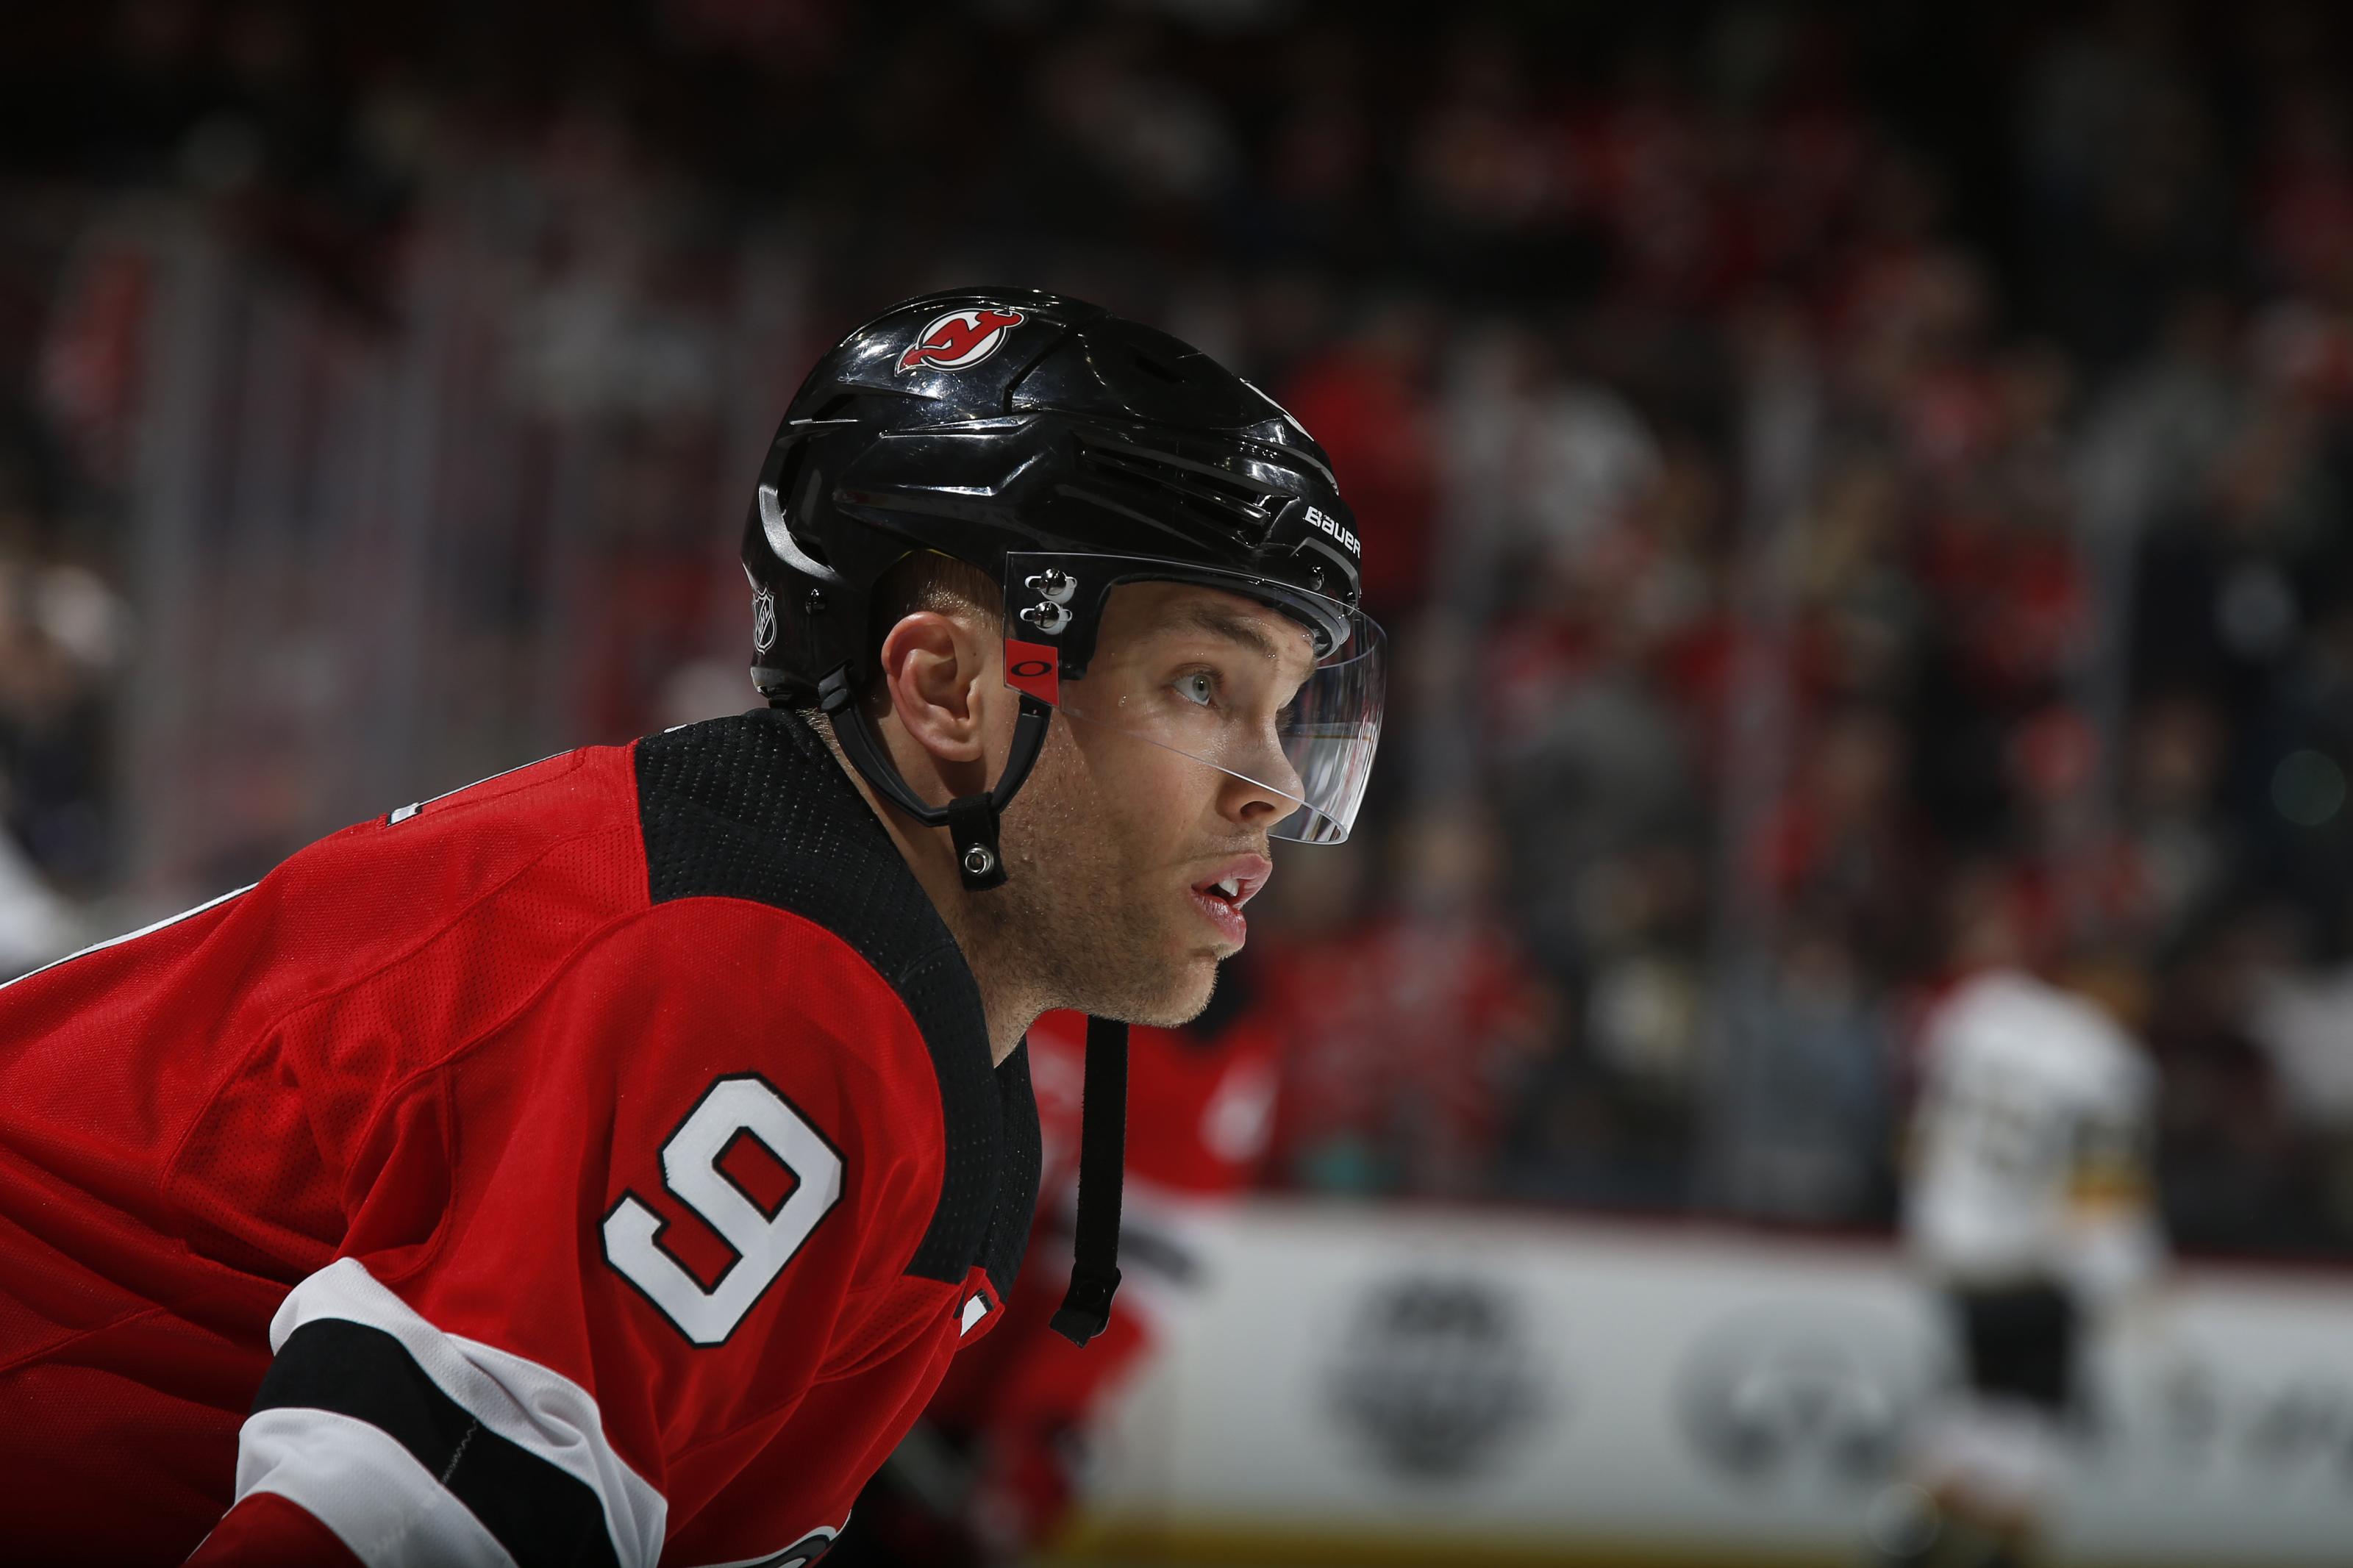 New Jersey Devils left wing Taylor Hall warms up before the start